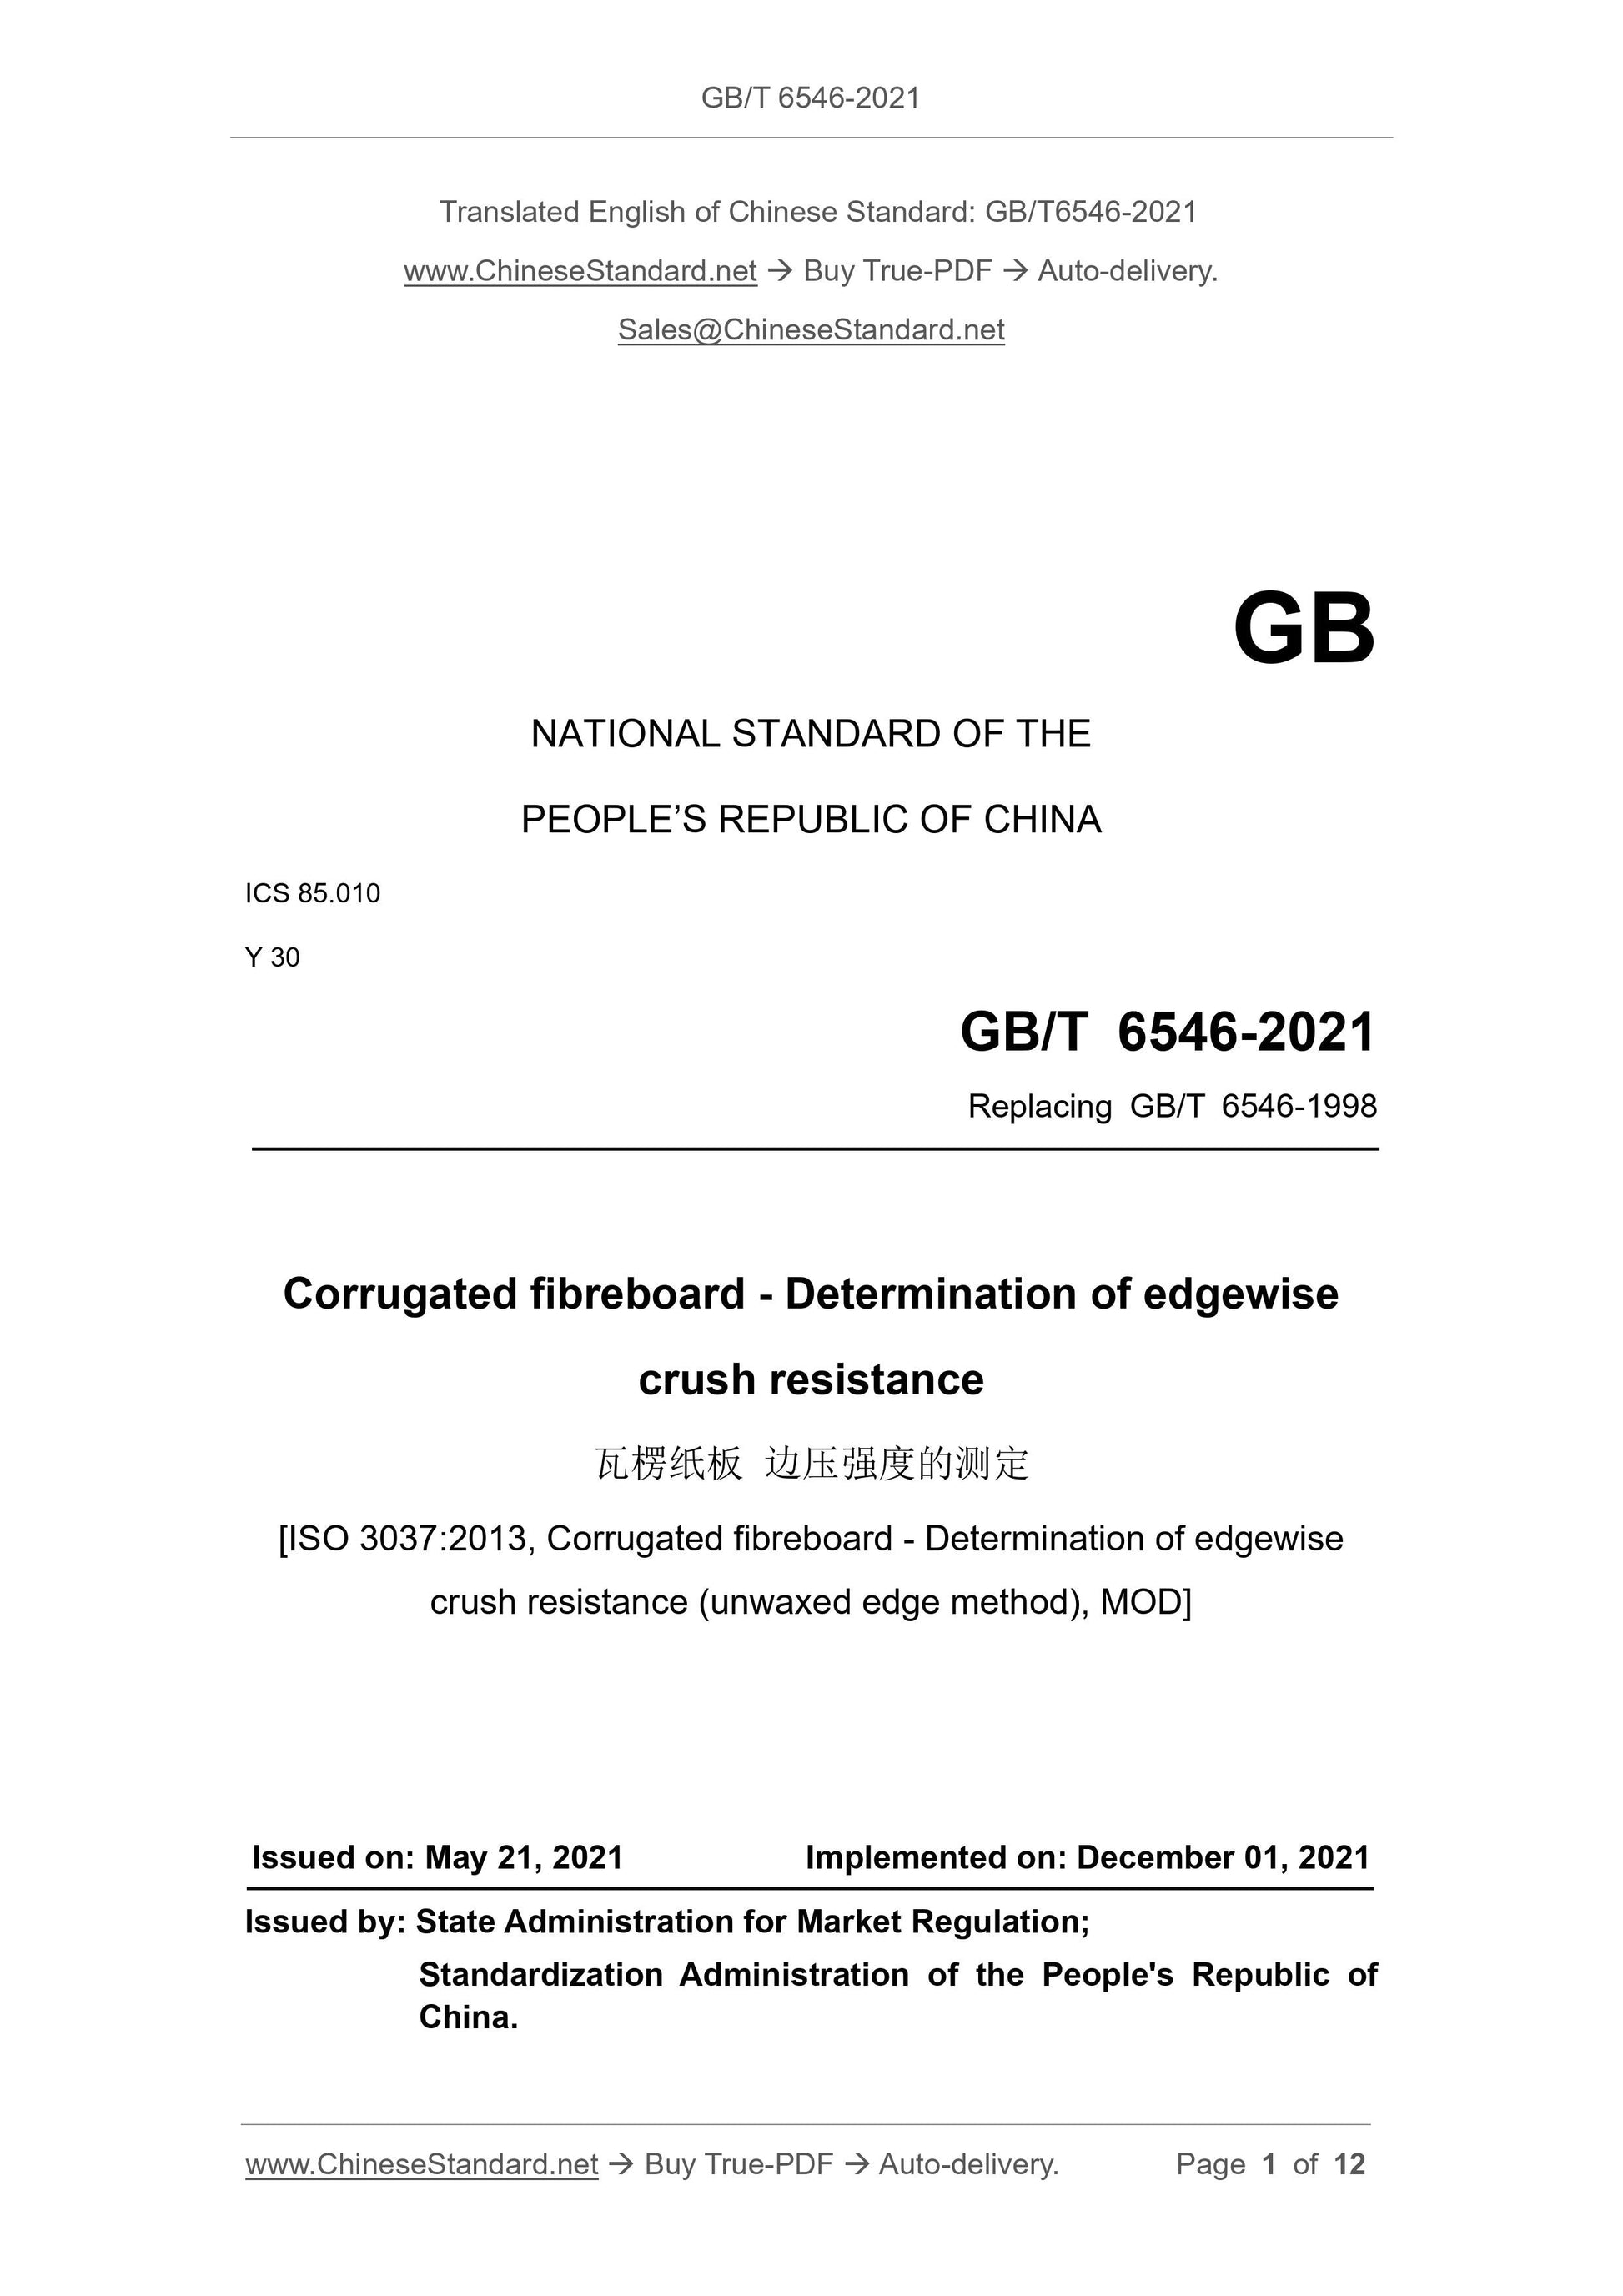 GB/T 6546-2021 Page 1